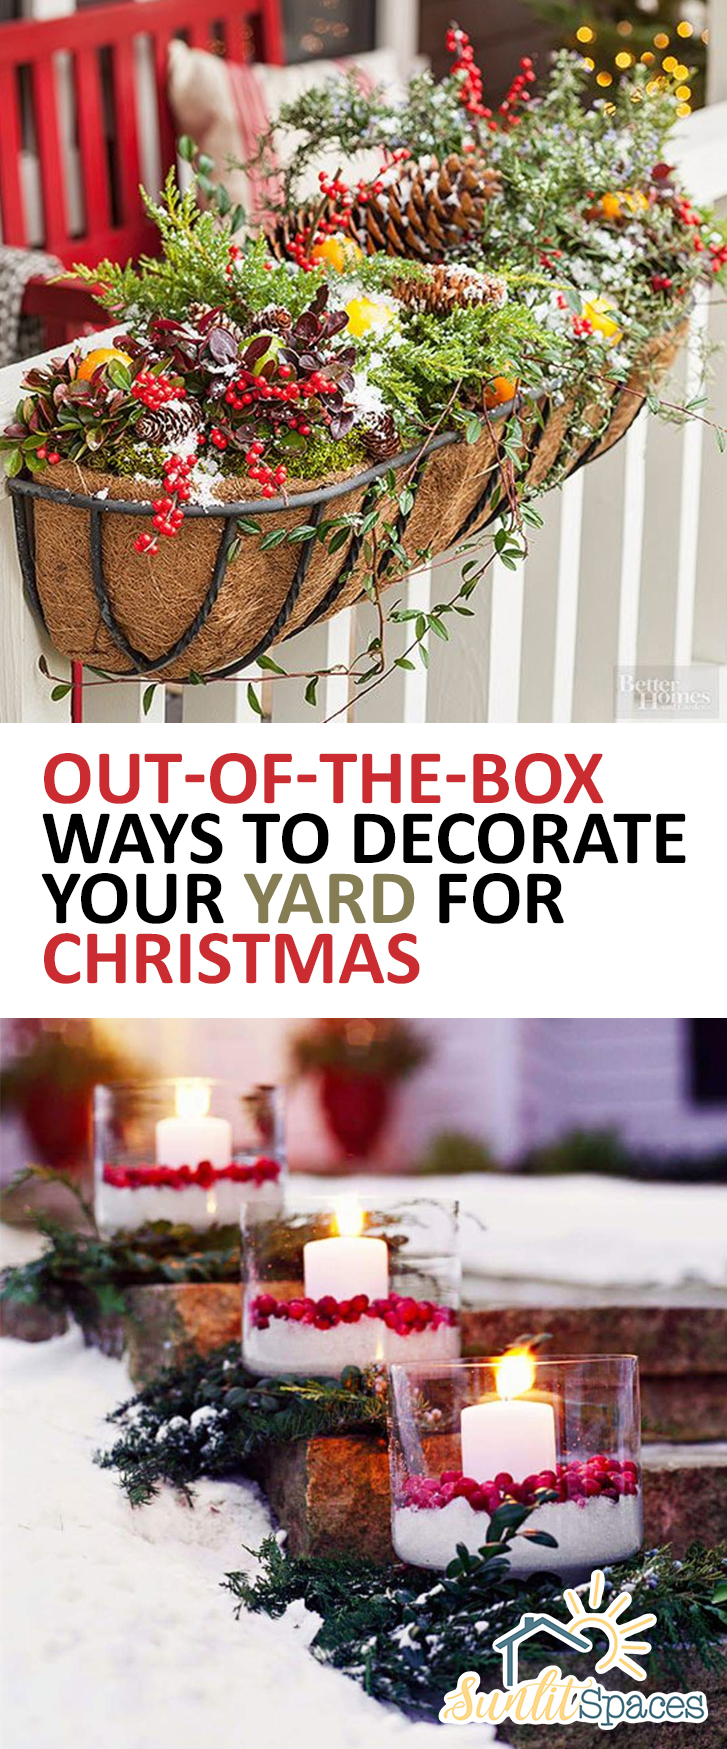 Out-of-the-Box Ways to Decorate Your Yard for Christmas